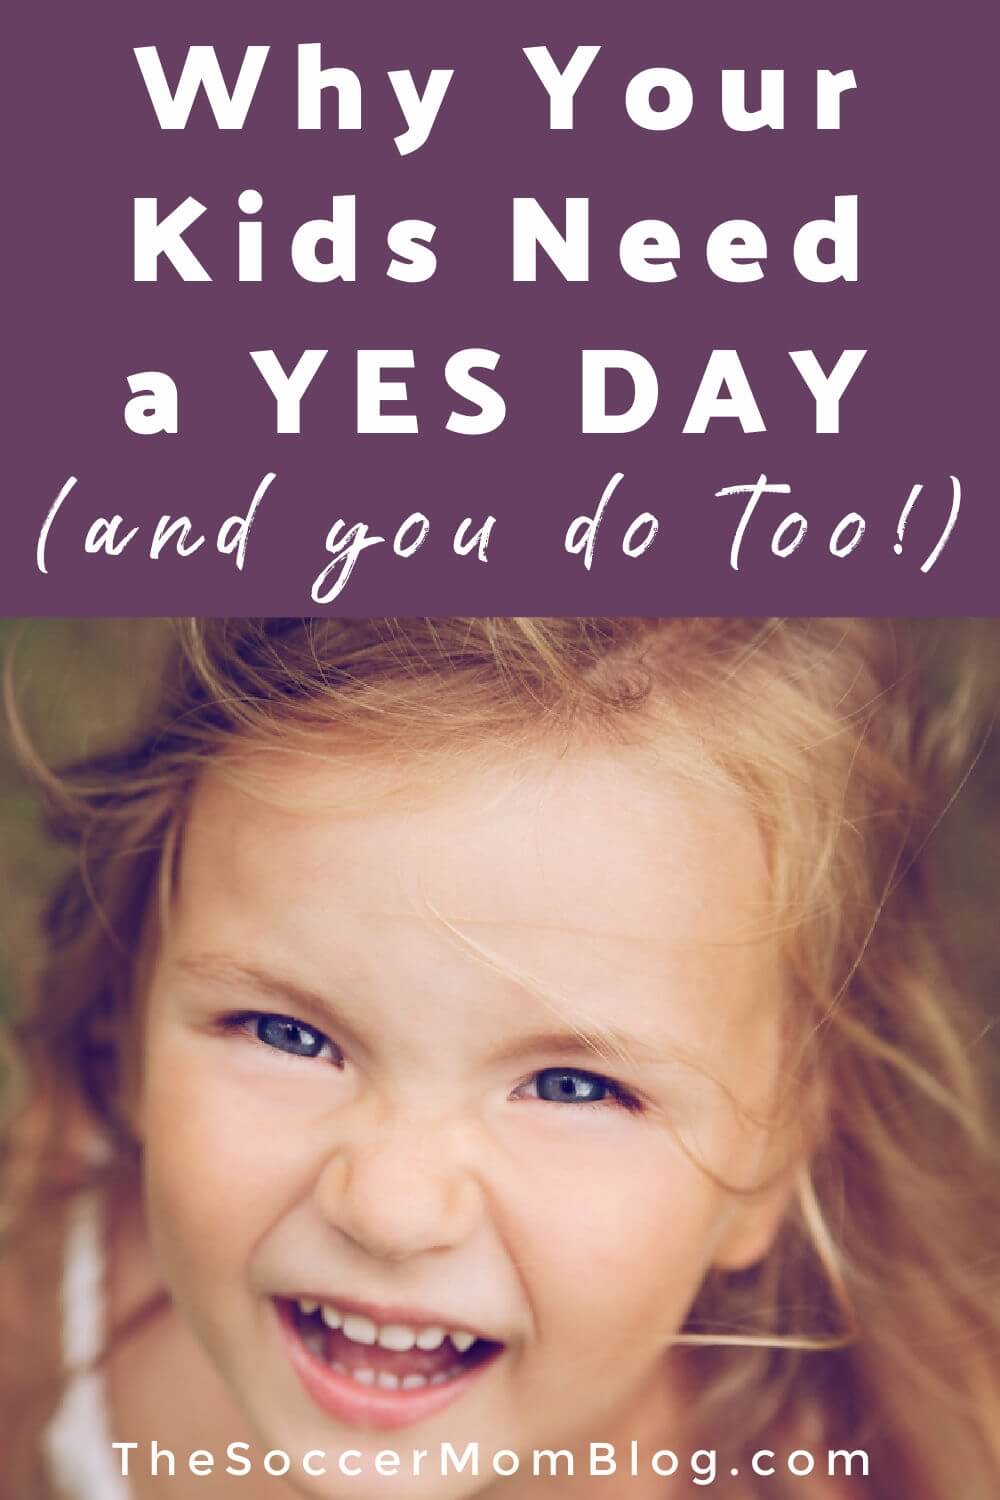 little girl looking up at camera; text overlay "Why Your Kids Need a Yes Day"